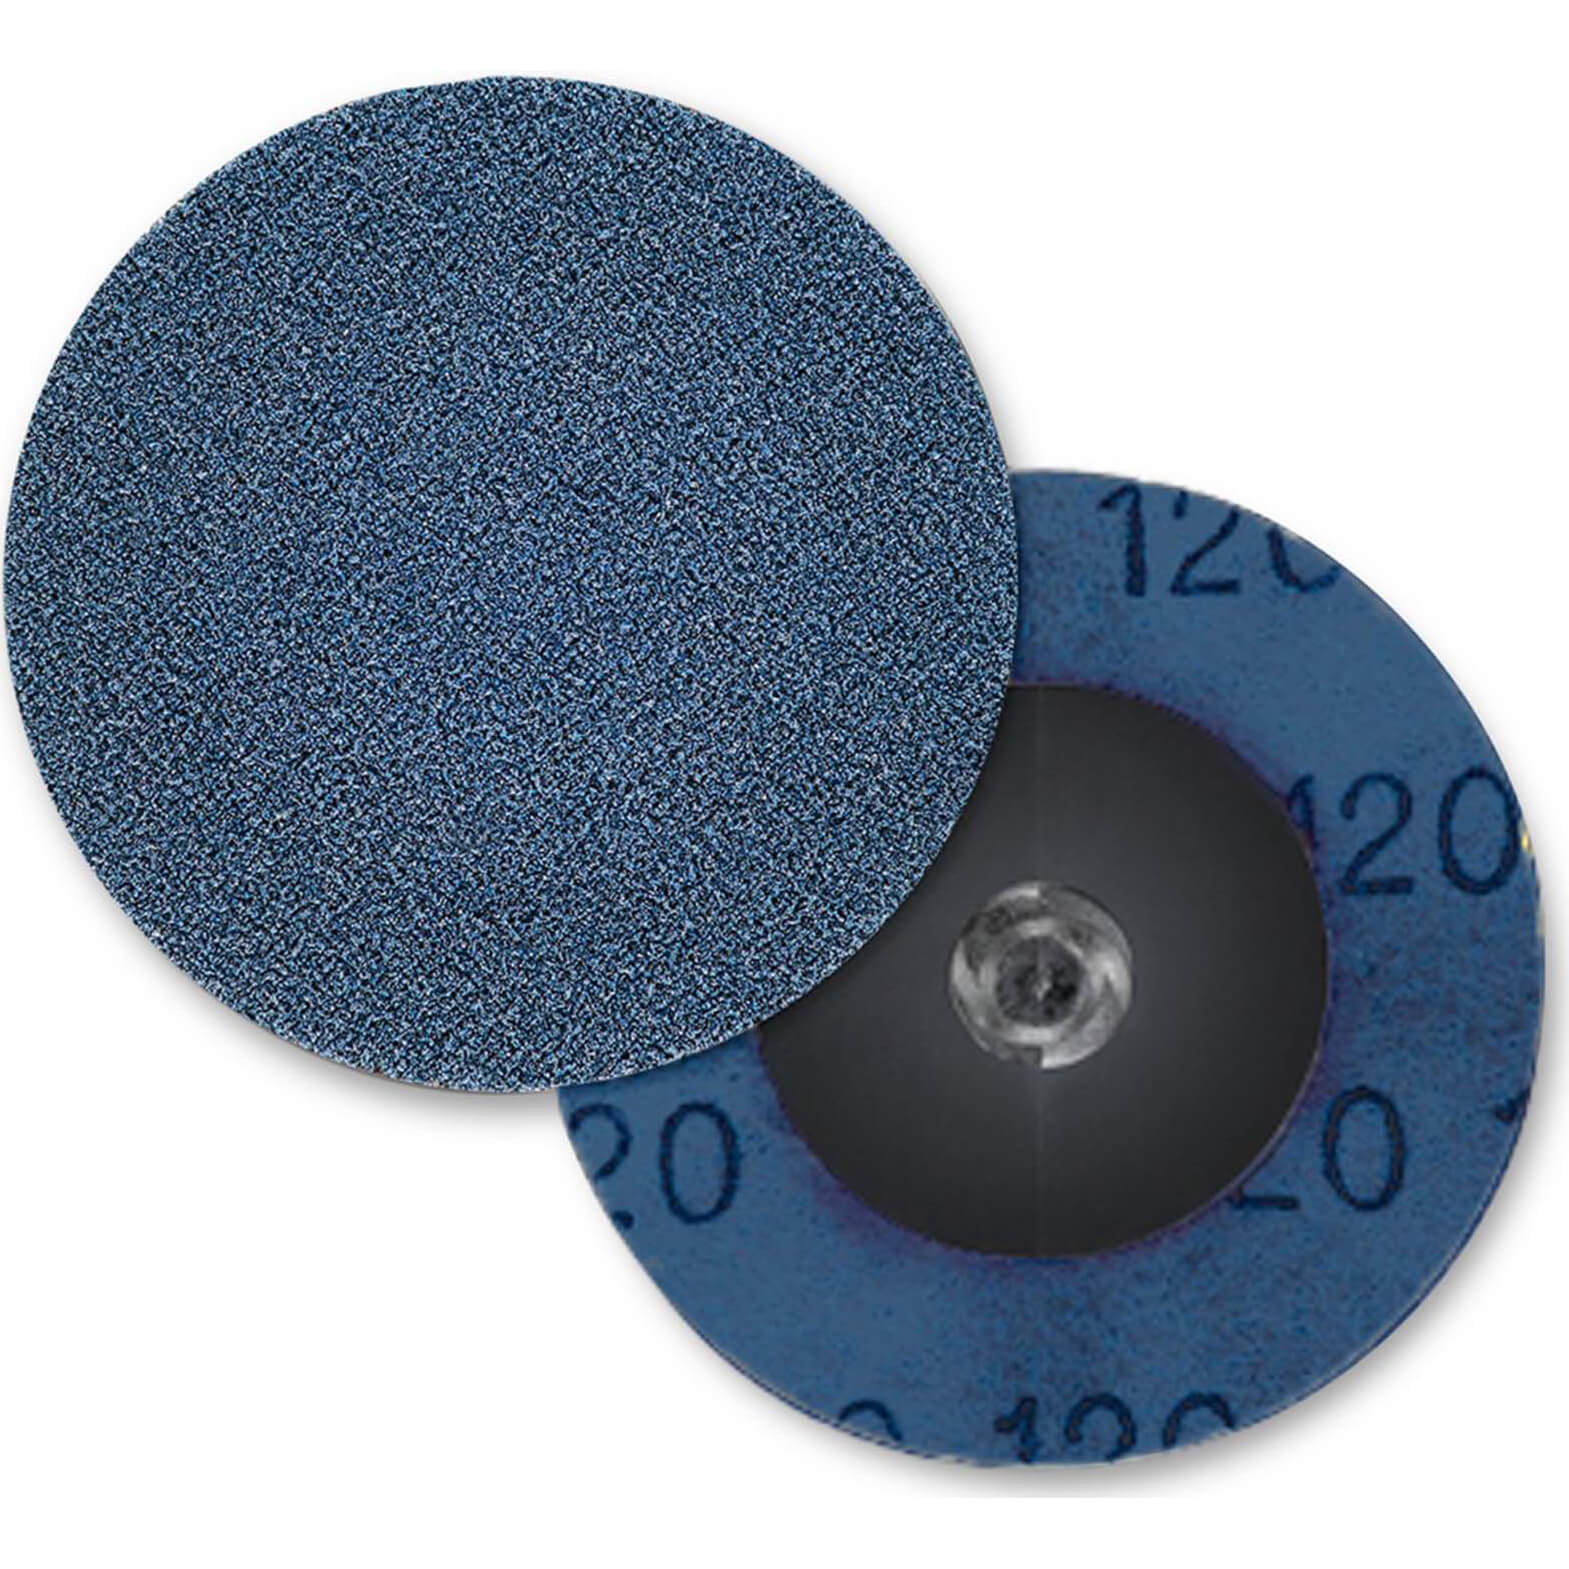 Photo of Sia 2820 Siamet X Quick Change Abrasives Discs 50mm 320g Pack Of 50